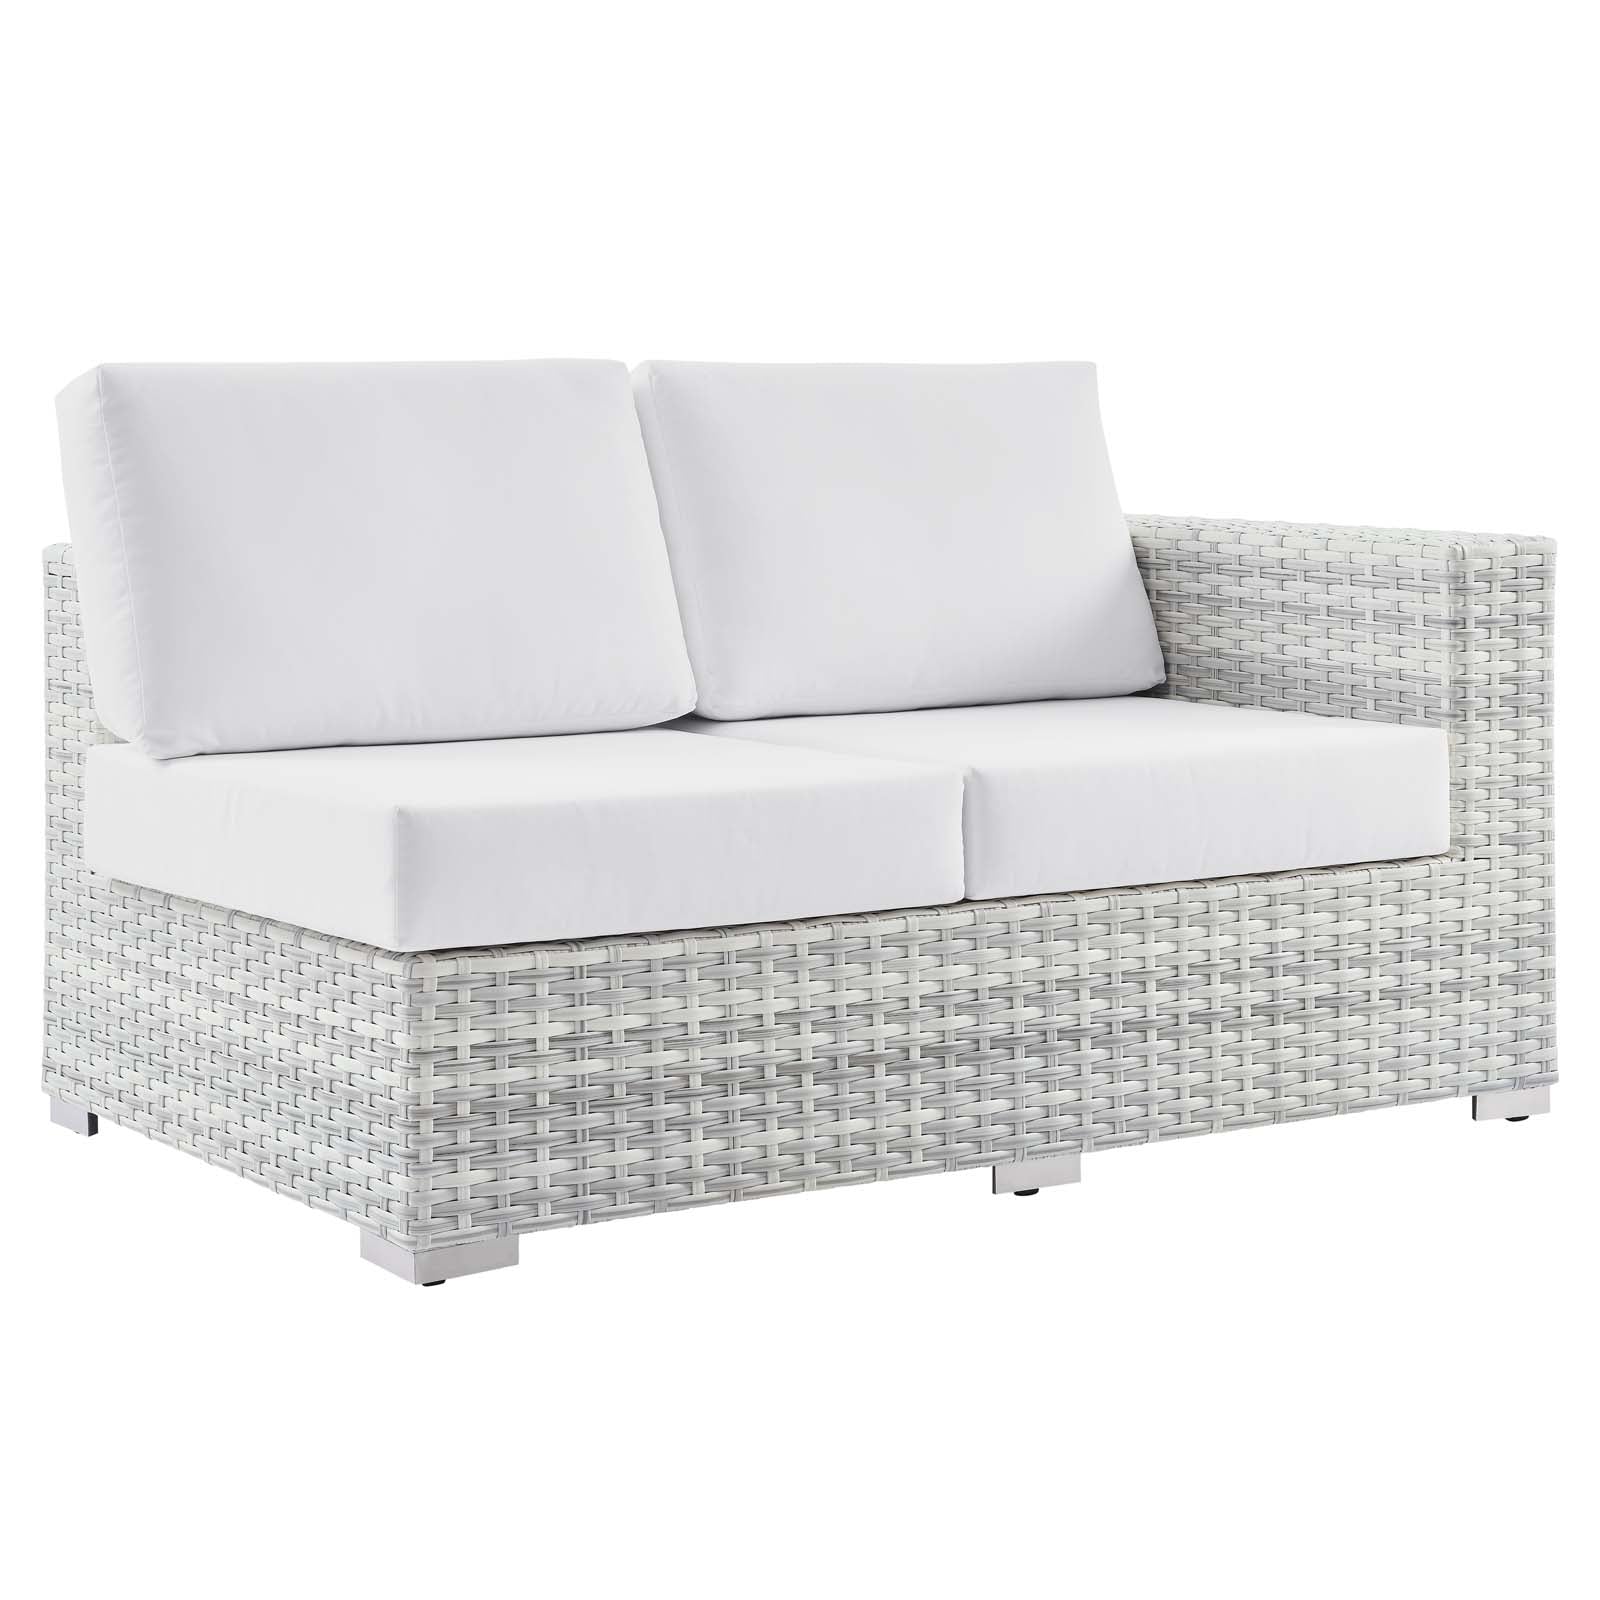 Modway Outdoor Sofas - Convene Outdoor Patio Right-Arm Loveseat Light Gray White